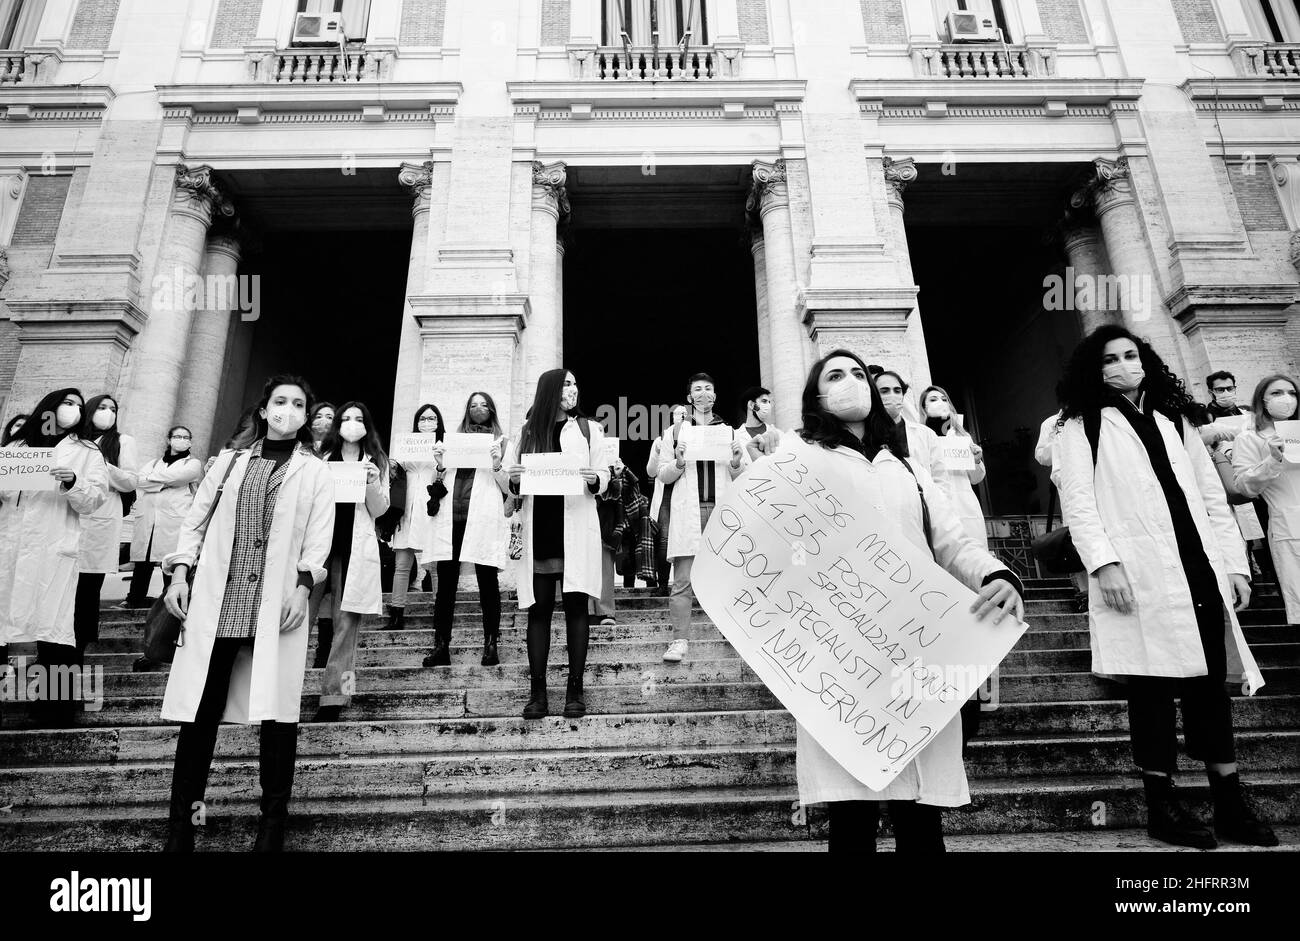 Mauro Scrobogna /LaPresse December 07, 2020&#xa0; Rome, Italy News Coronavirus, health emergency - resident doctors protest In the photo: protest in front of the Mystery of the school and university of young doctors against the blocking of the admission competition for doctors to specialization schools in the health area for the academic year 2019/2020 Stock Photo